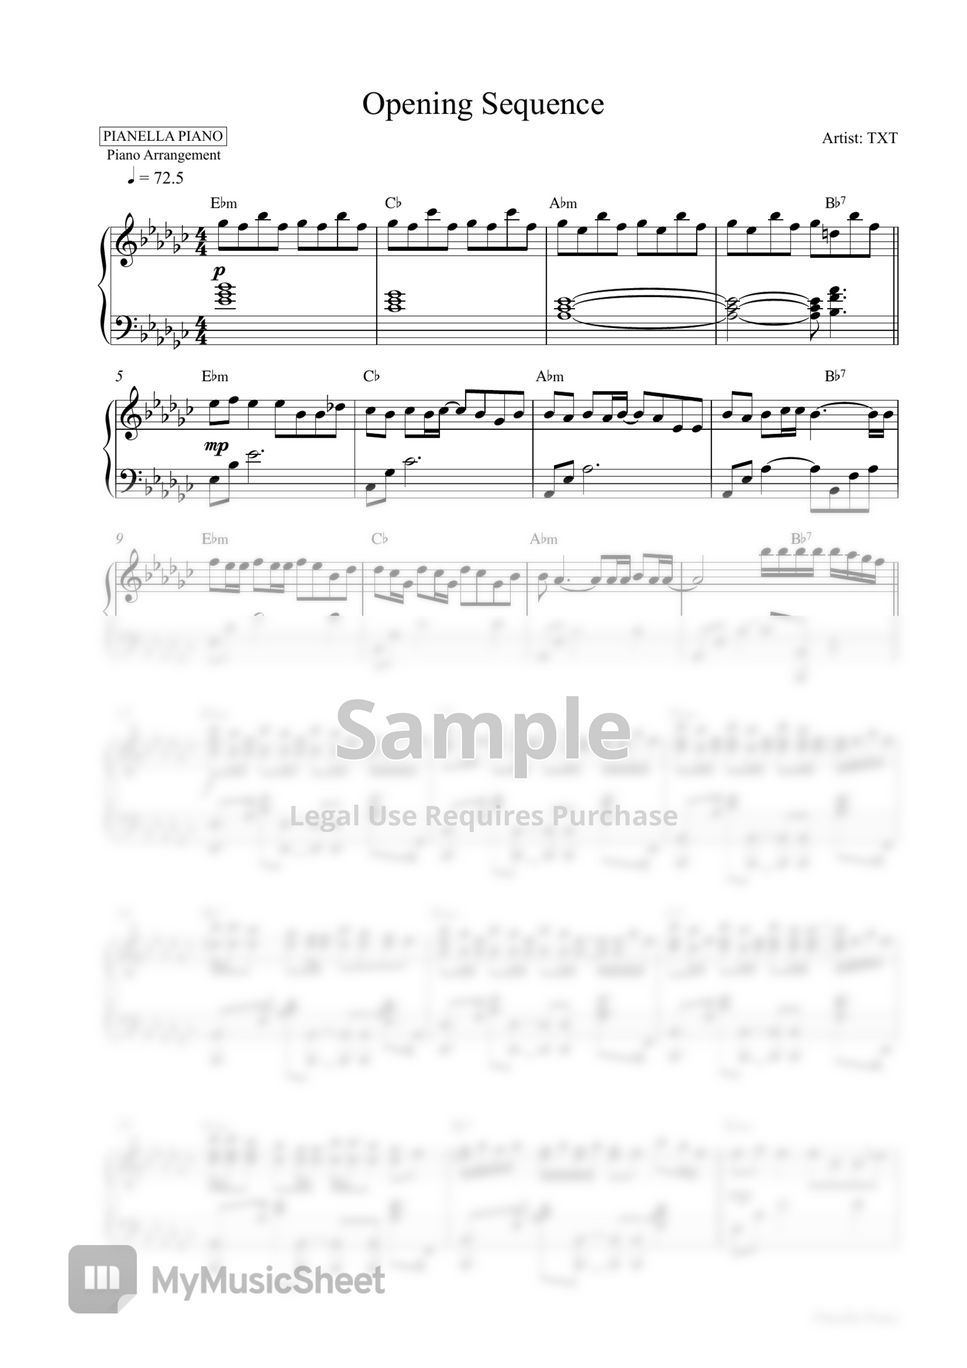 TXT - Opening Sequence (2 Piano PDF: Original Key & Easier Key) by Pianella Piano